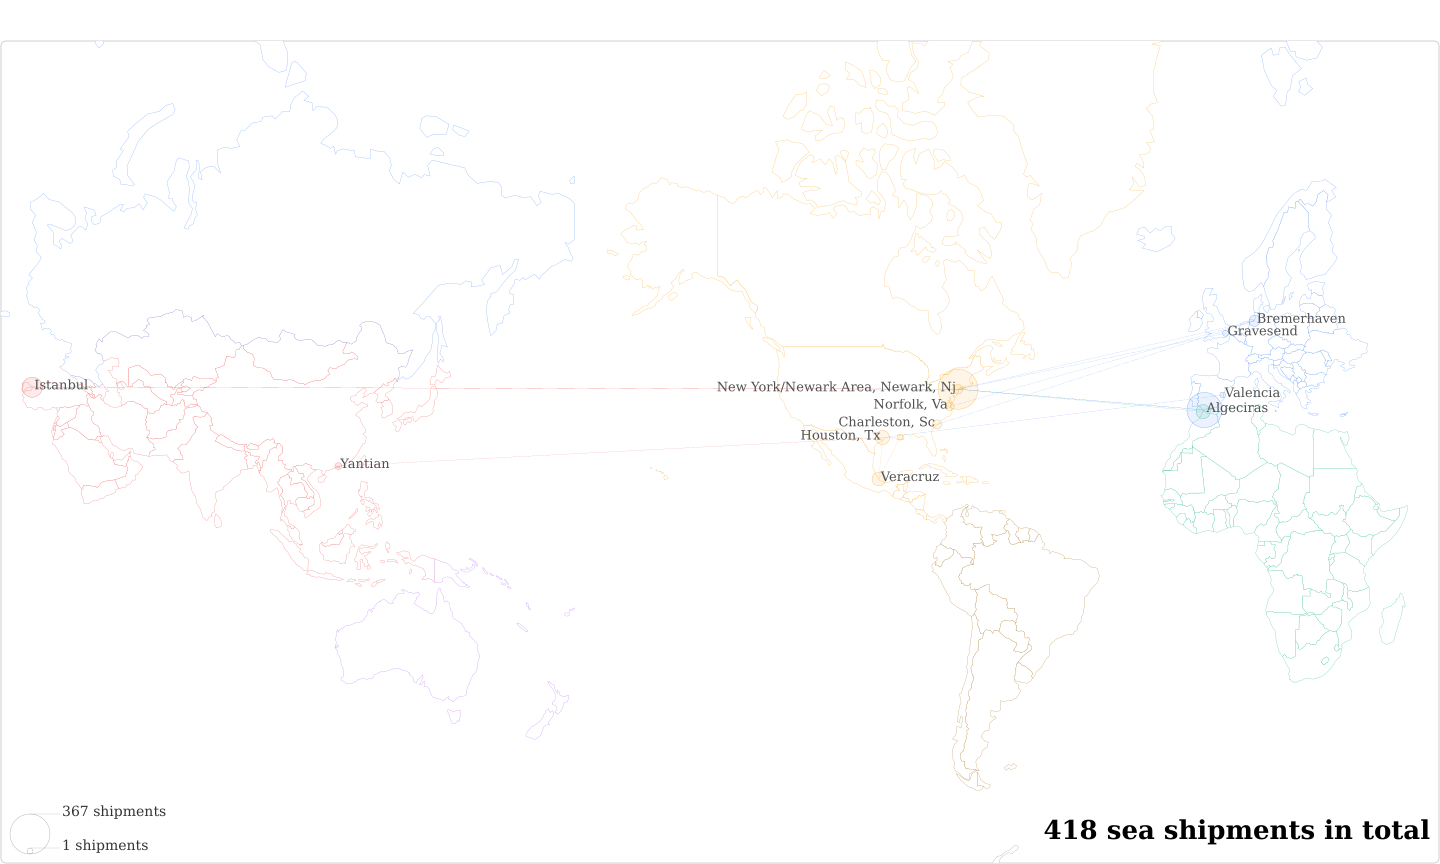 Nike Global Trade Singapore Branch's Imports Per Country Map